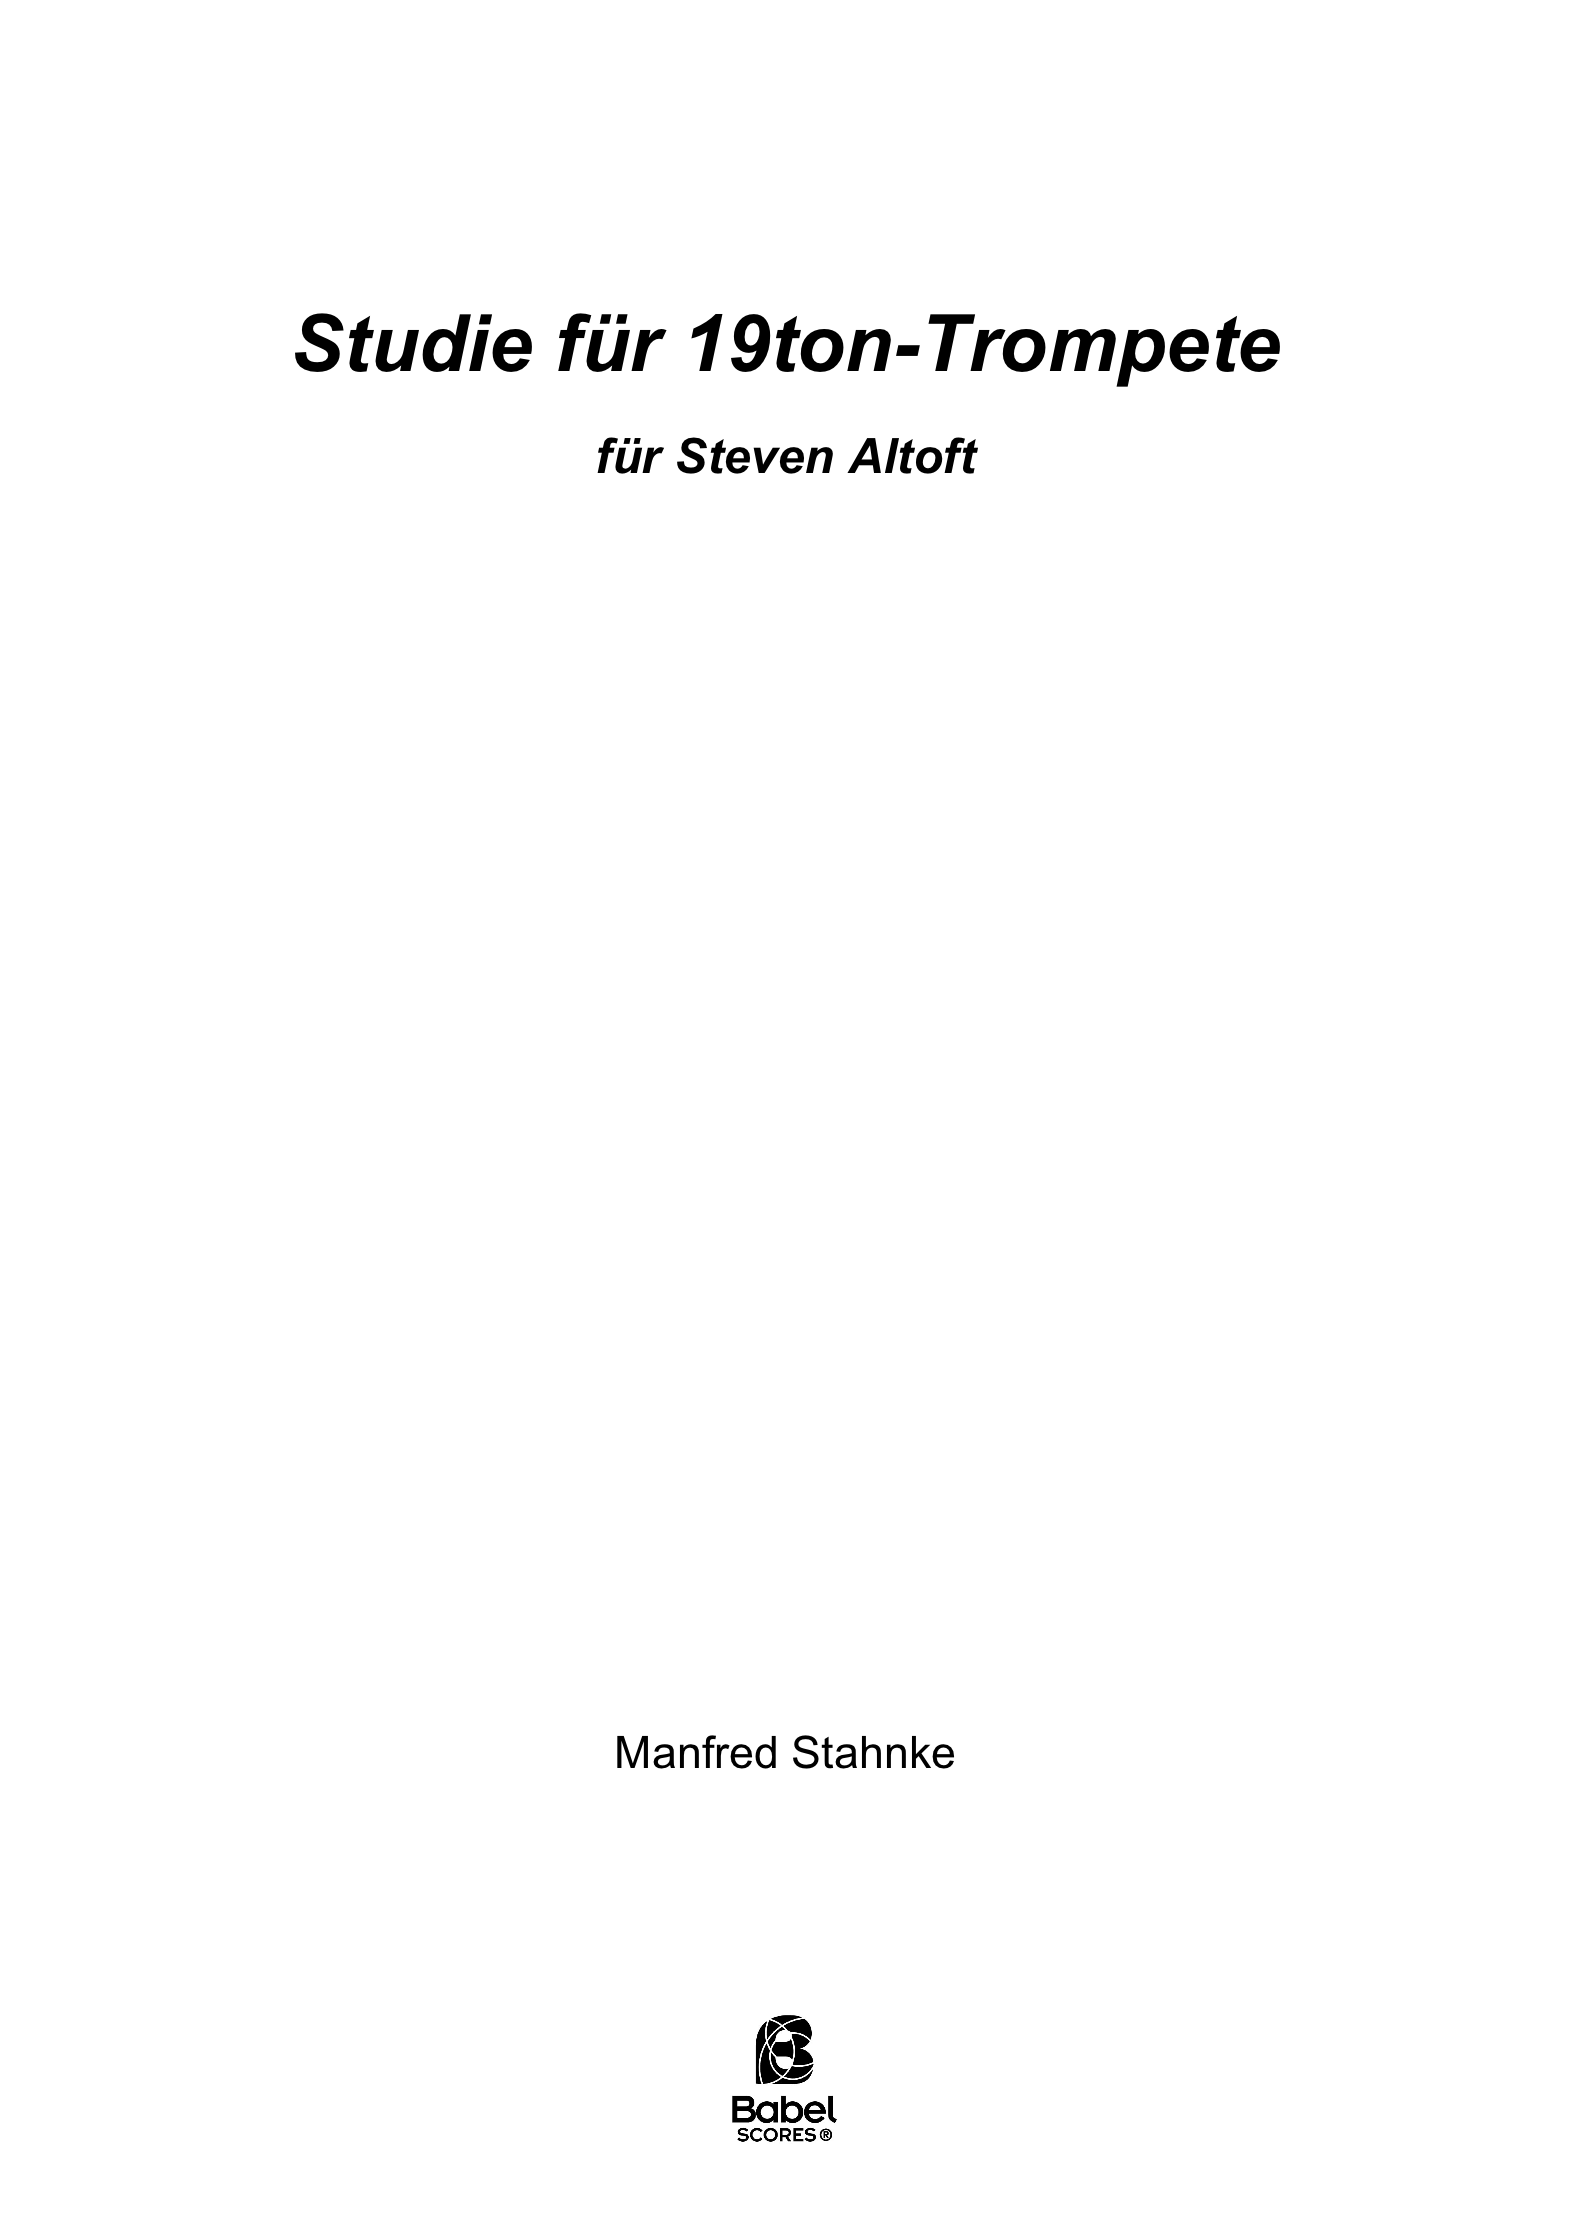 study for 19tone trumpet A4 z 2 263 1 923